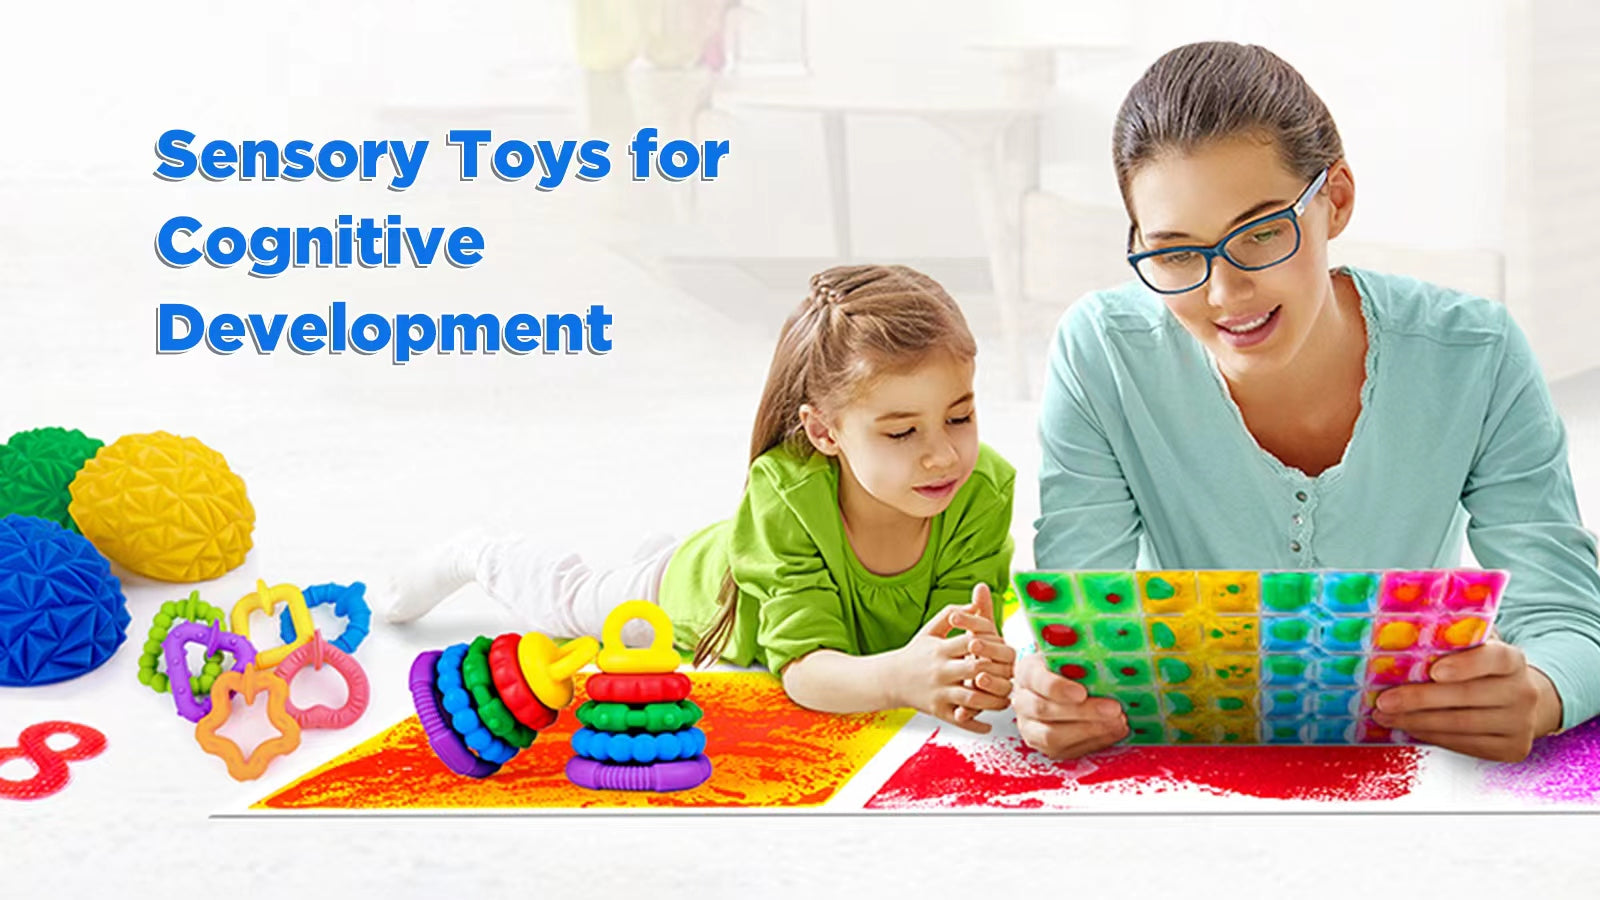 How to Use Sensory Toys for Cognitive Development